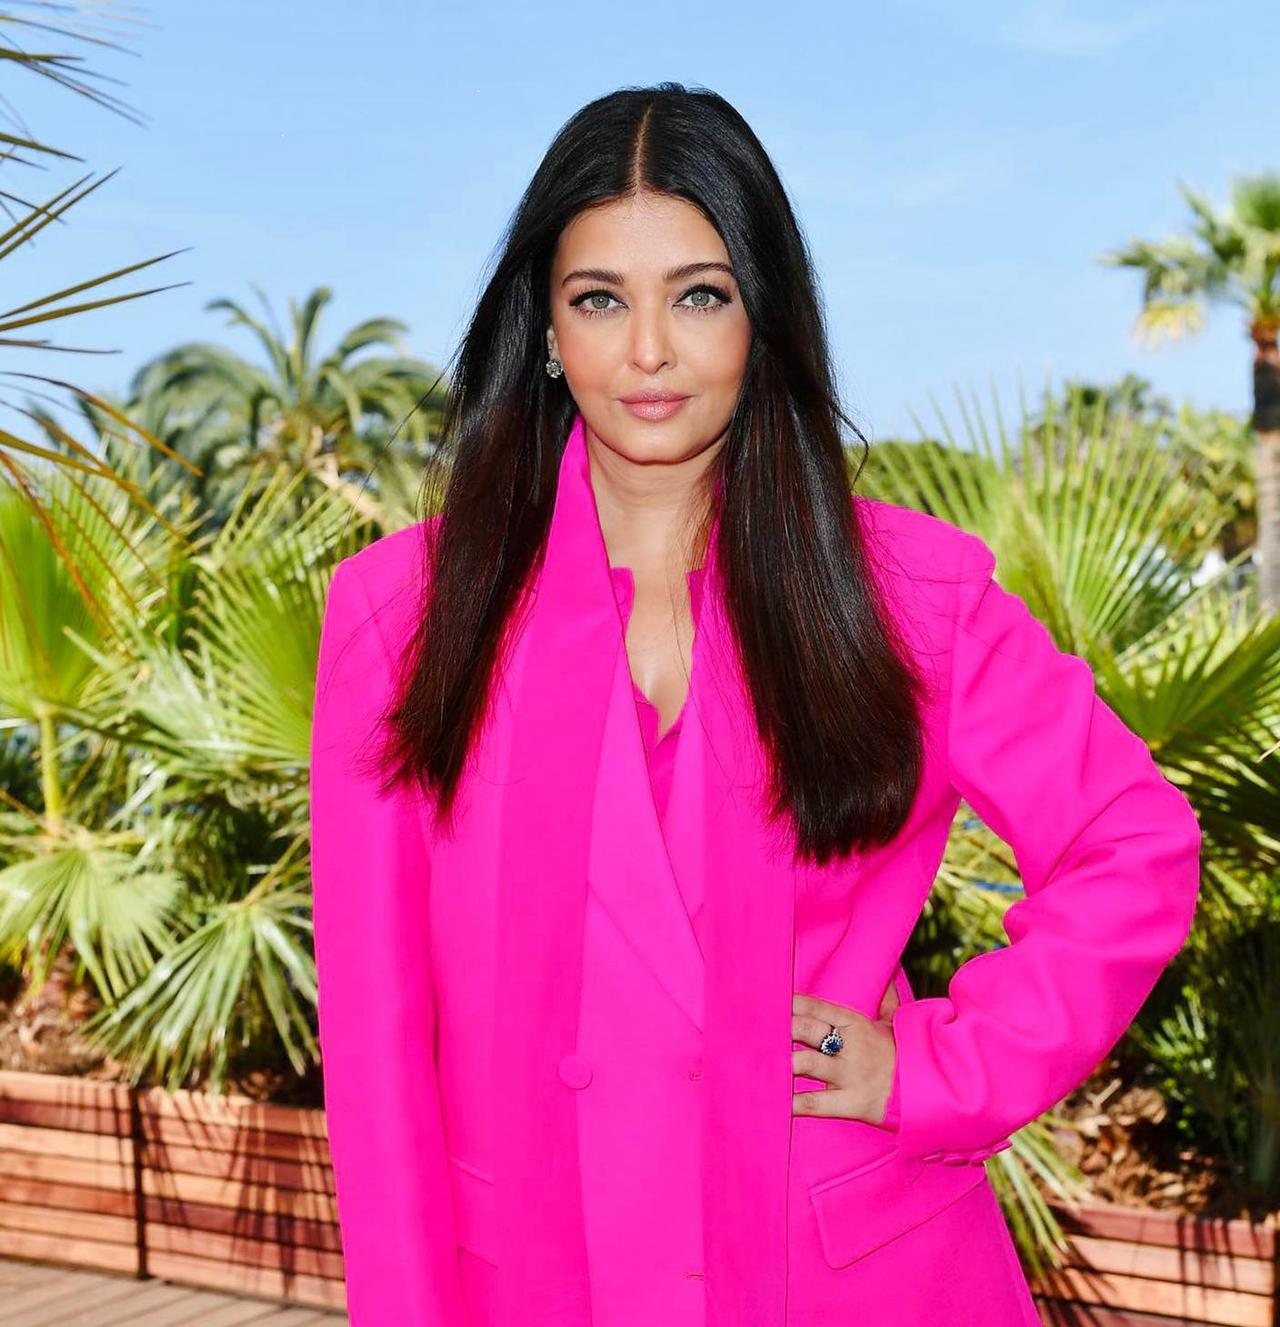 Aishwarya Rai Bachchan is now a Cannes veteran. Fans were waiting for the actress to share pictures from the festival on her Instagram account and finally the moment came. She shared three pictures striking a stunning pose in a pink Valentino suit. The caption had three hearts, and those were pink too.